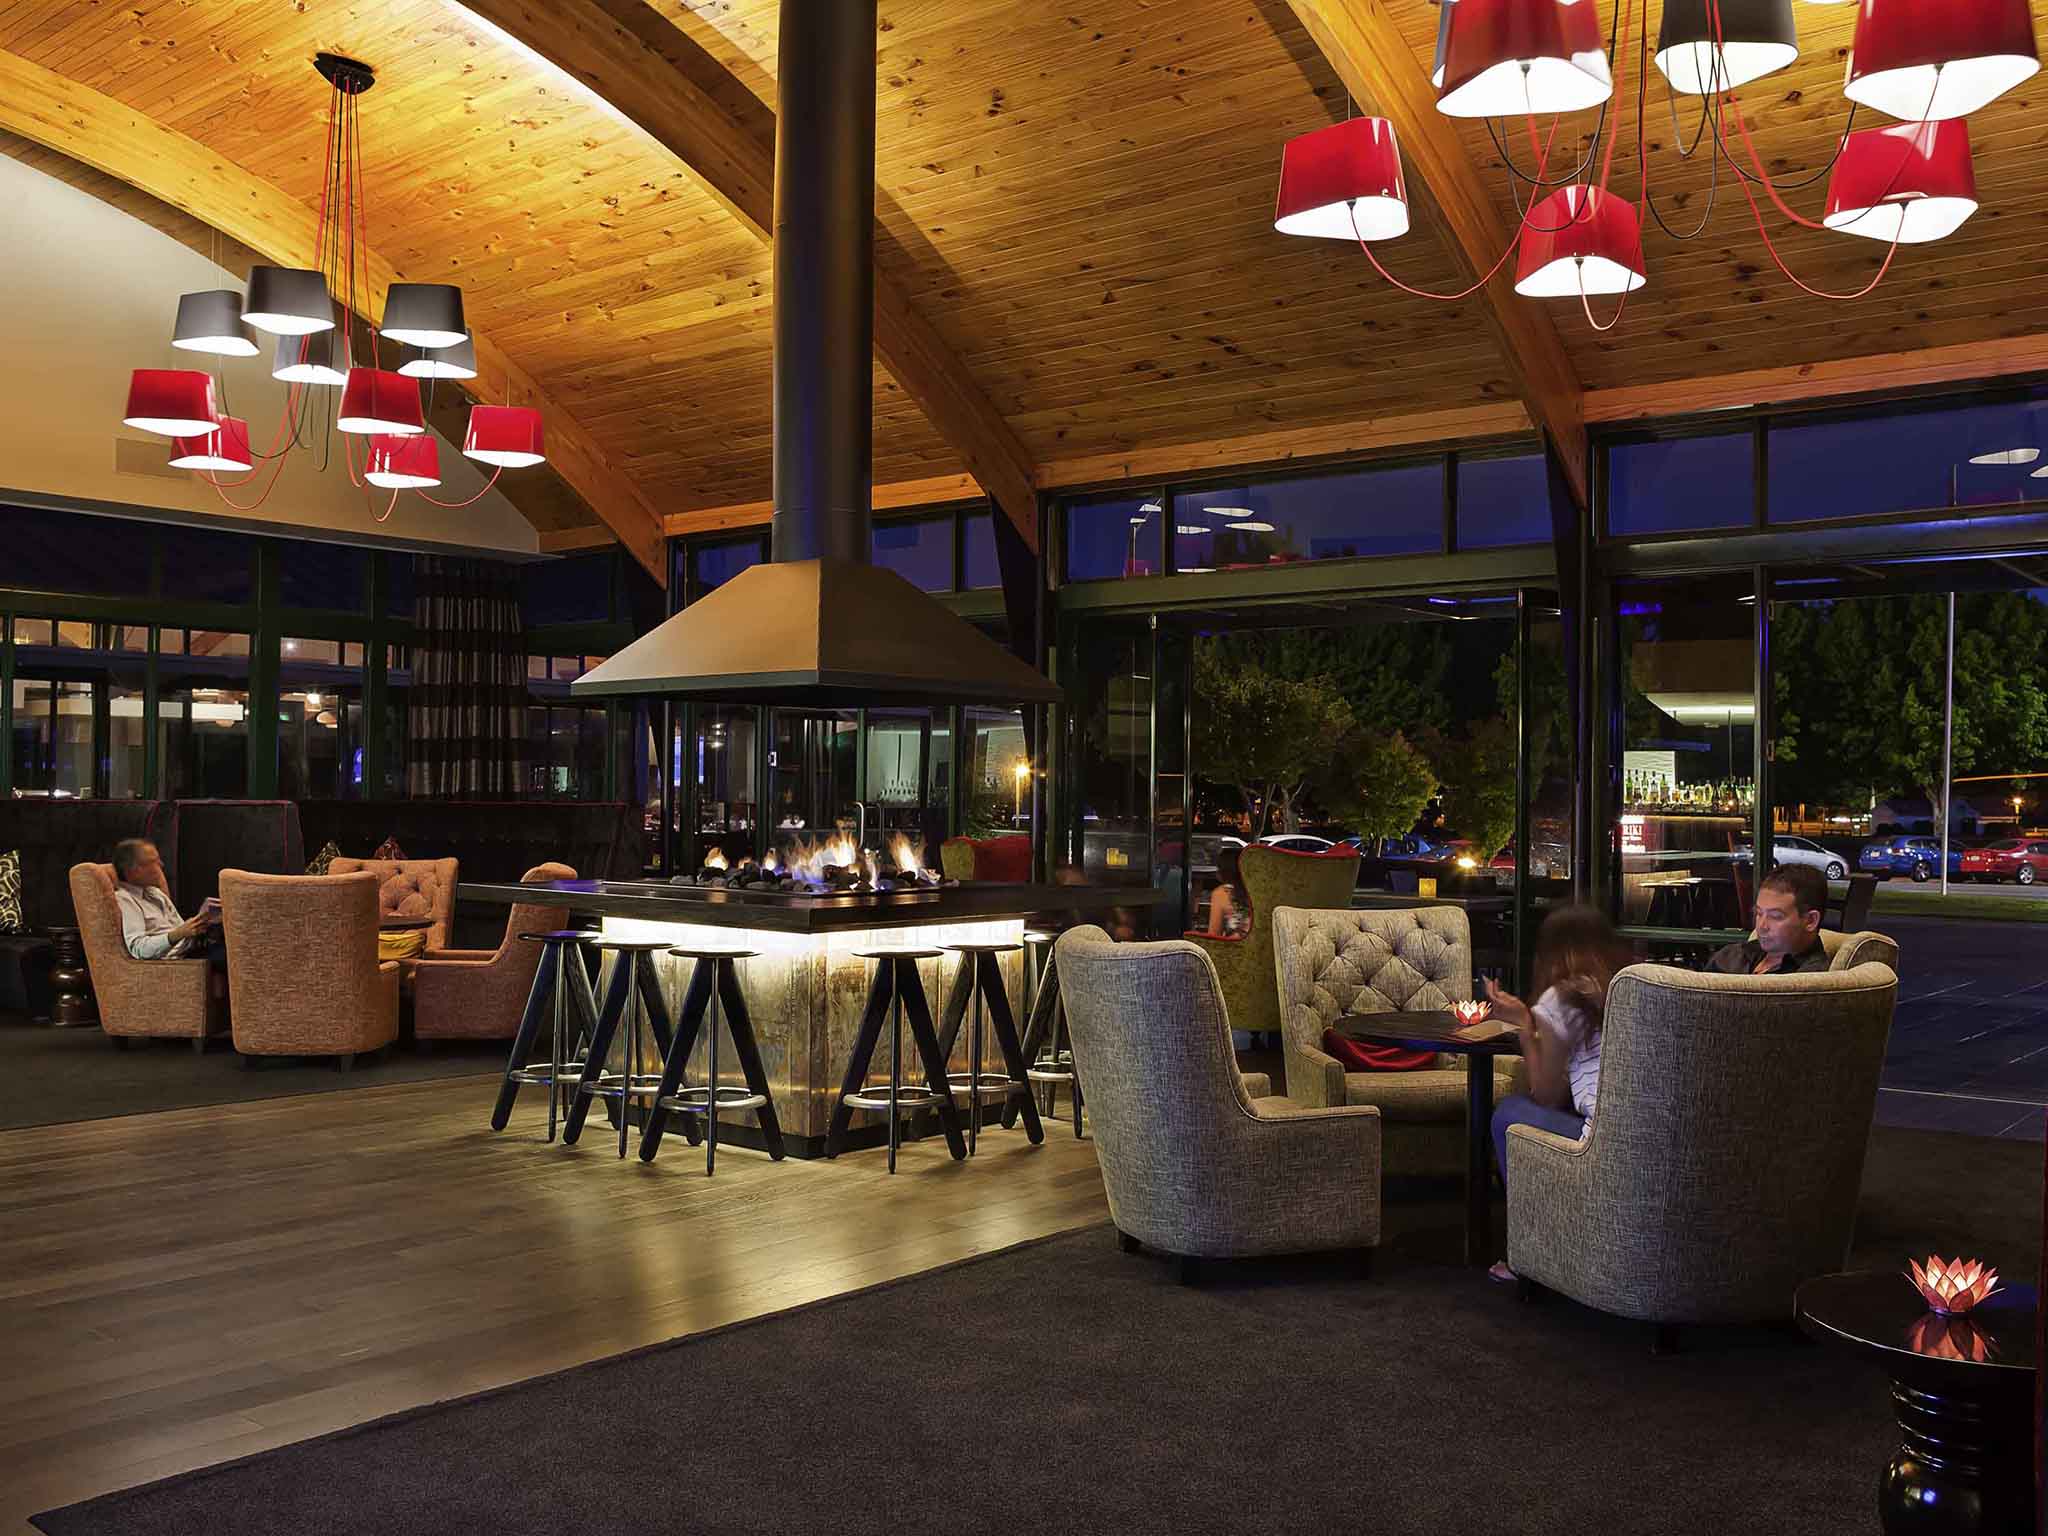 AccorHotels Pullman brand joins the hotel operators Novotel and Ibis lakefront hotels in Rotorua New Zealand